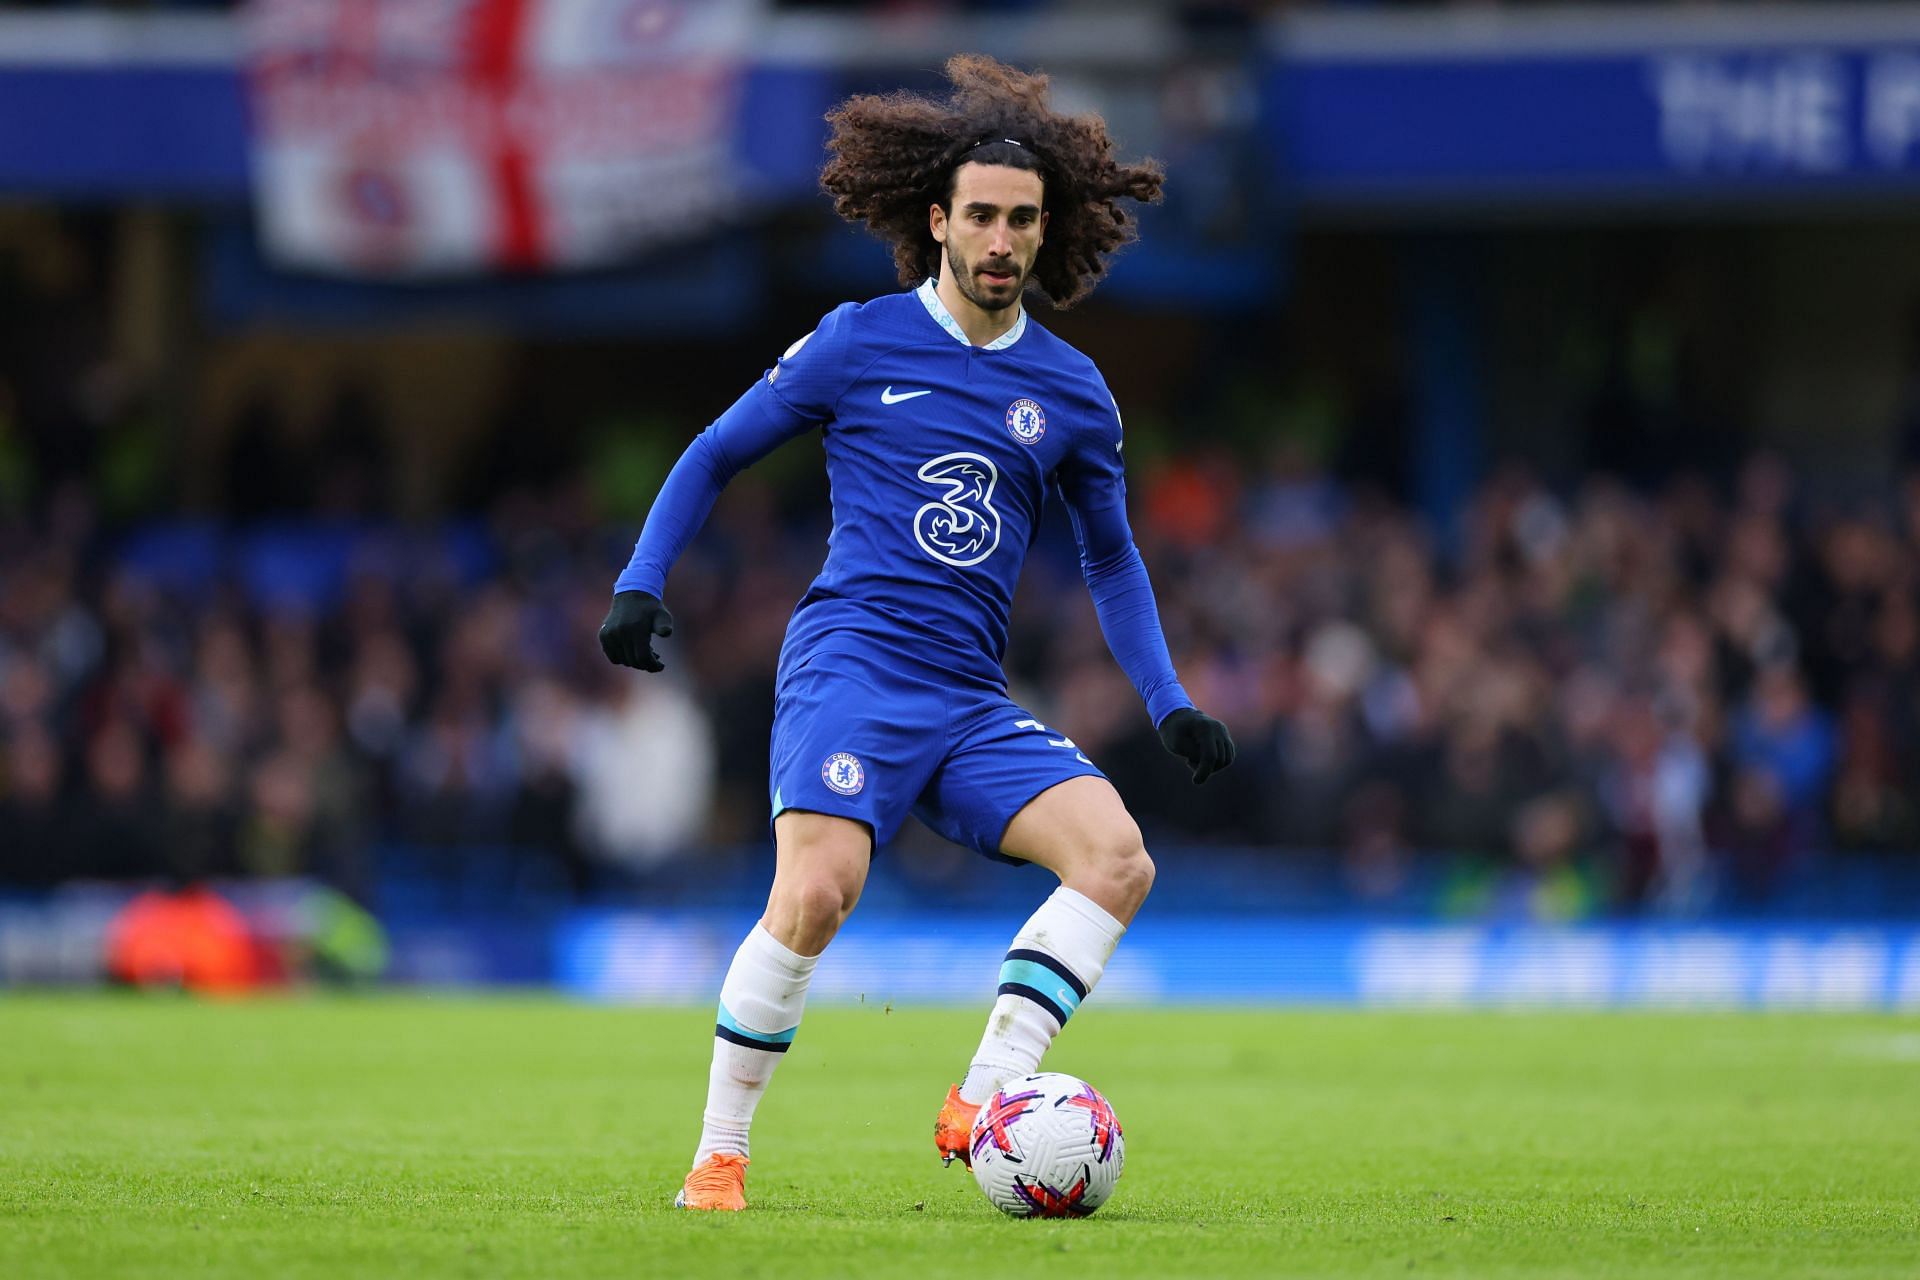 Cucurella could complete a loan move to Manchester United.